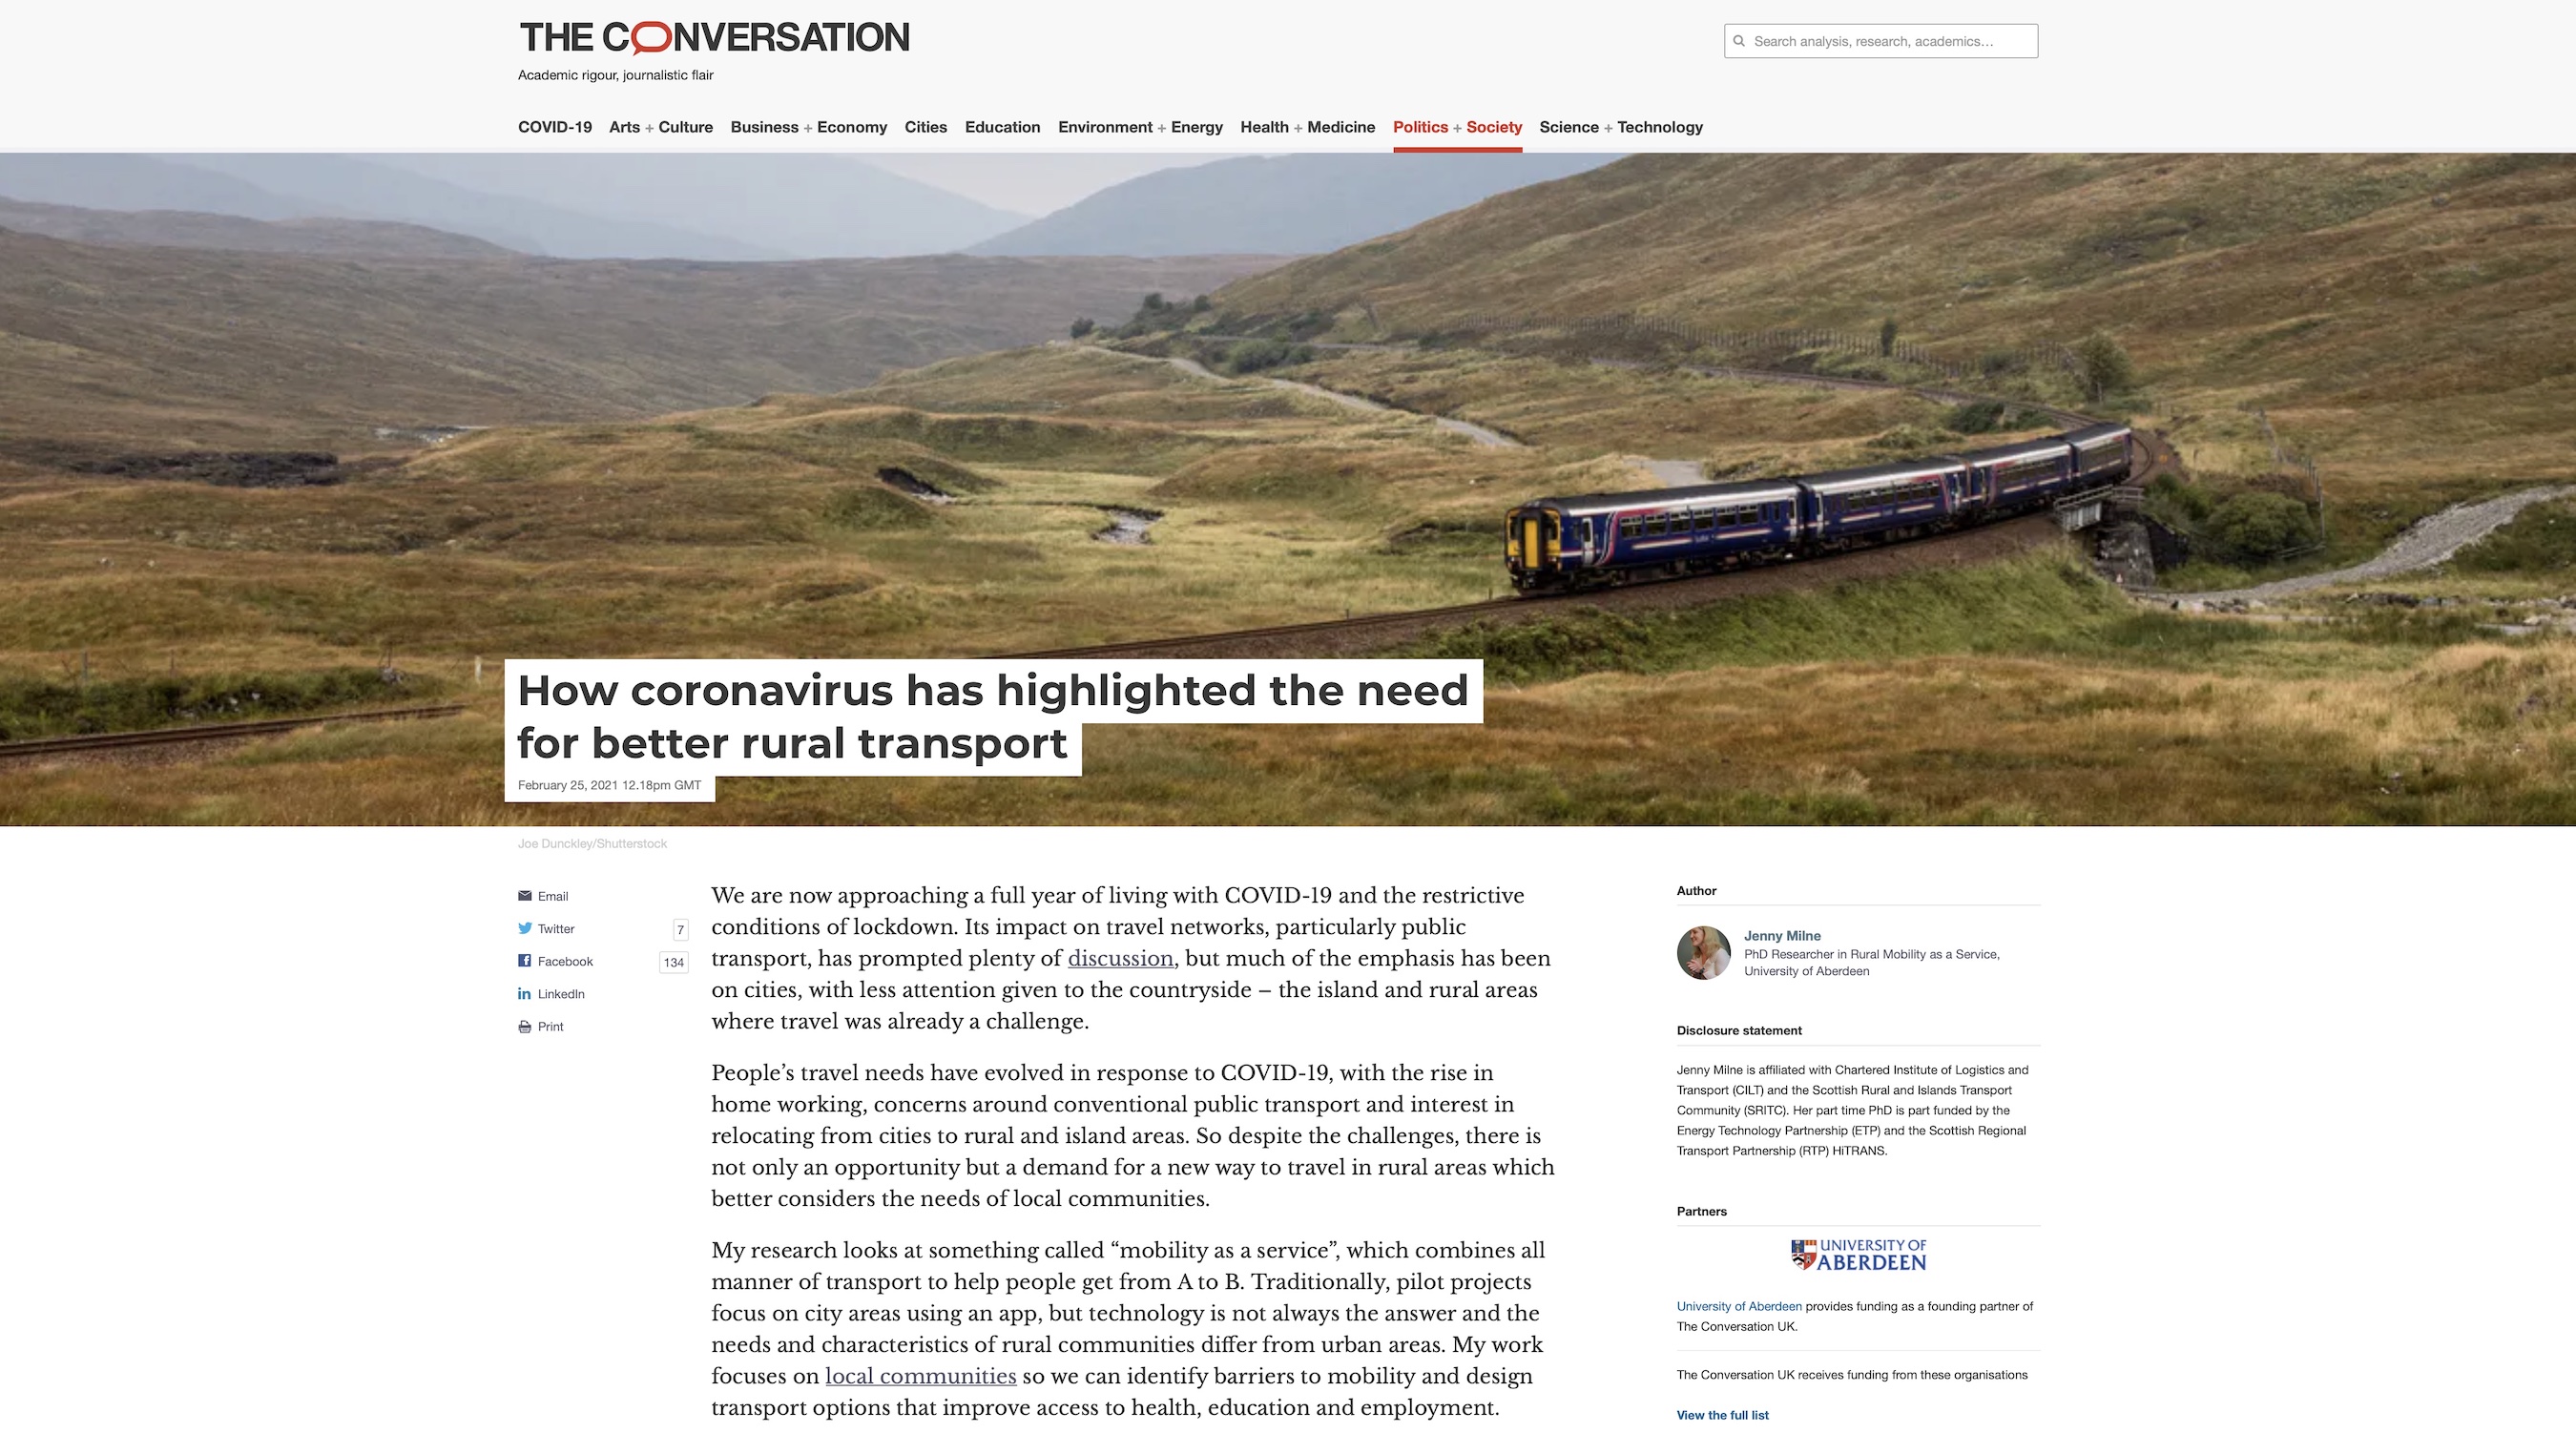 https://theconversation.com/how-coronavirus-has-highlighted-the-need-for-better-rural-transport-155533